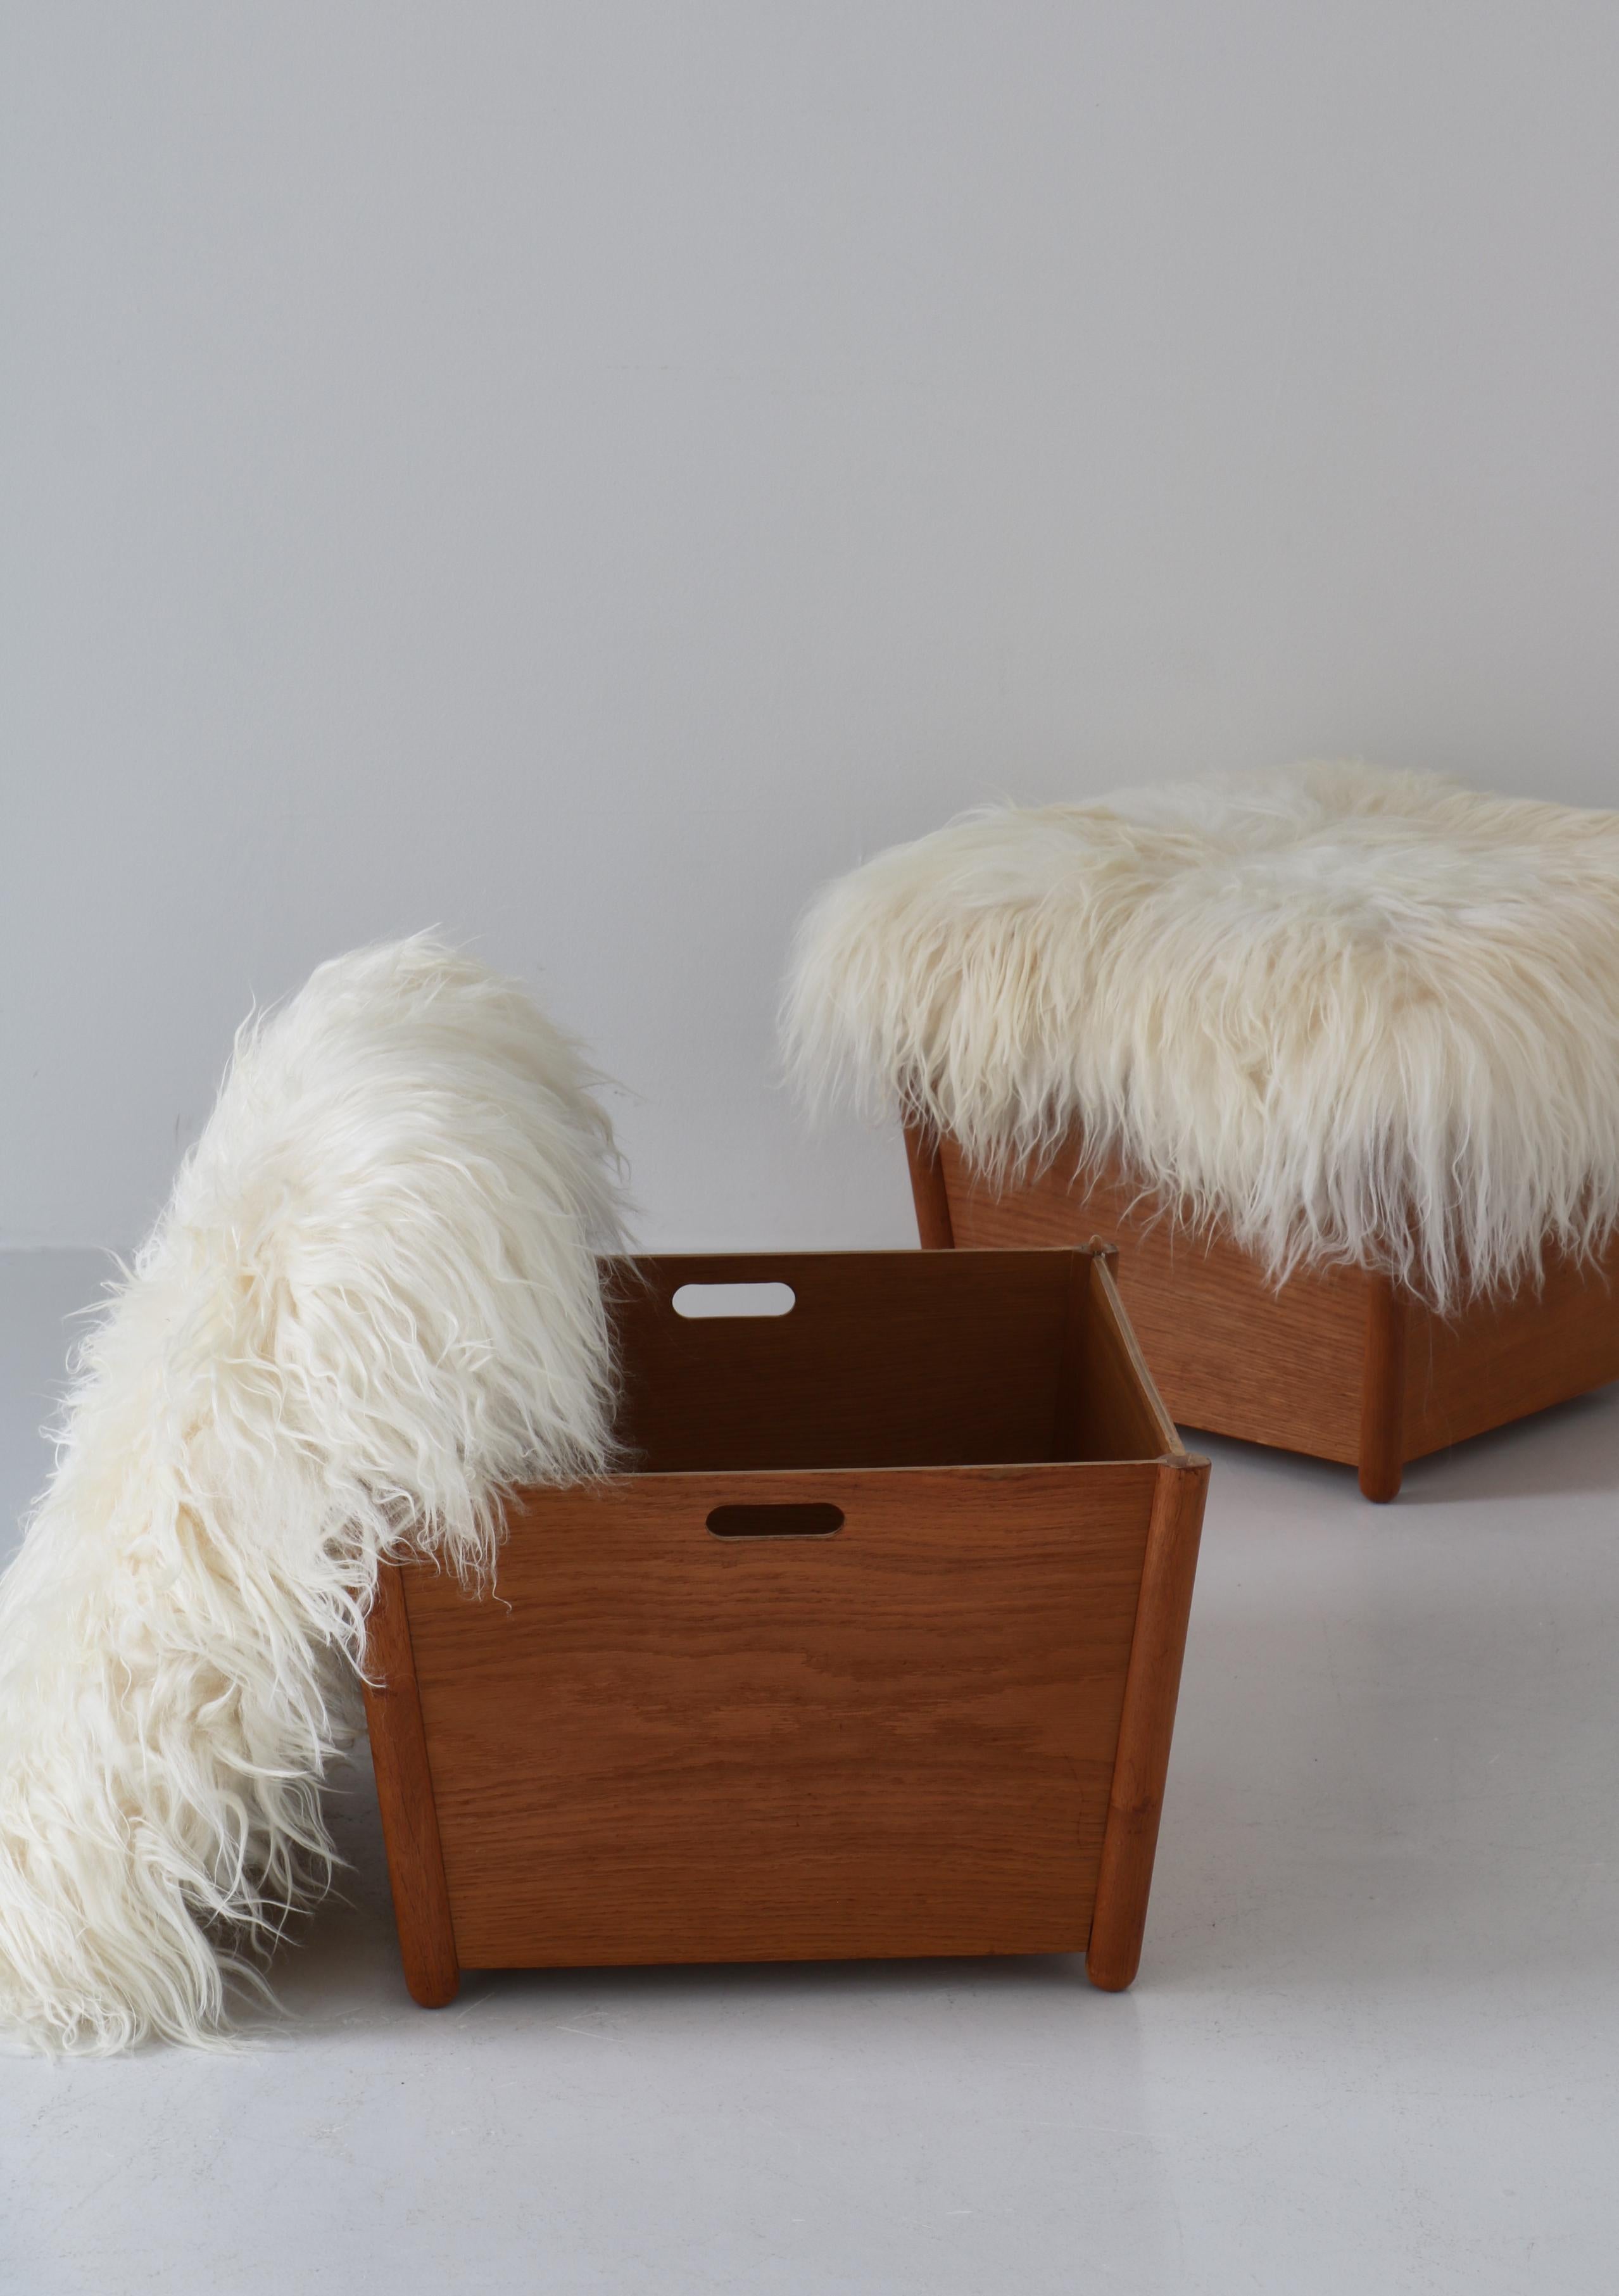 Pair of Scandinavian Modern Stools in Oak and Sheepskin, Denmark, 1960s In Good Condition For Sale In Odense, DK